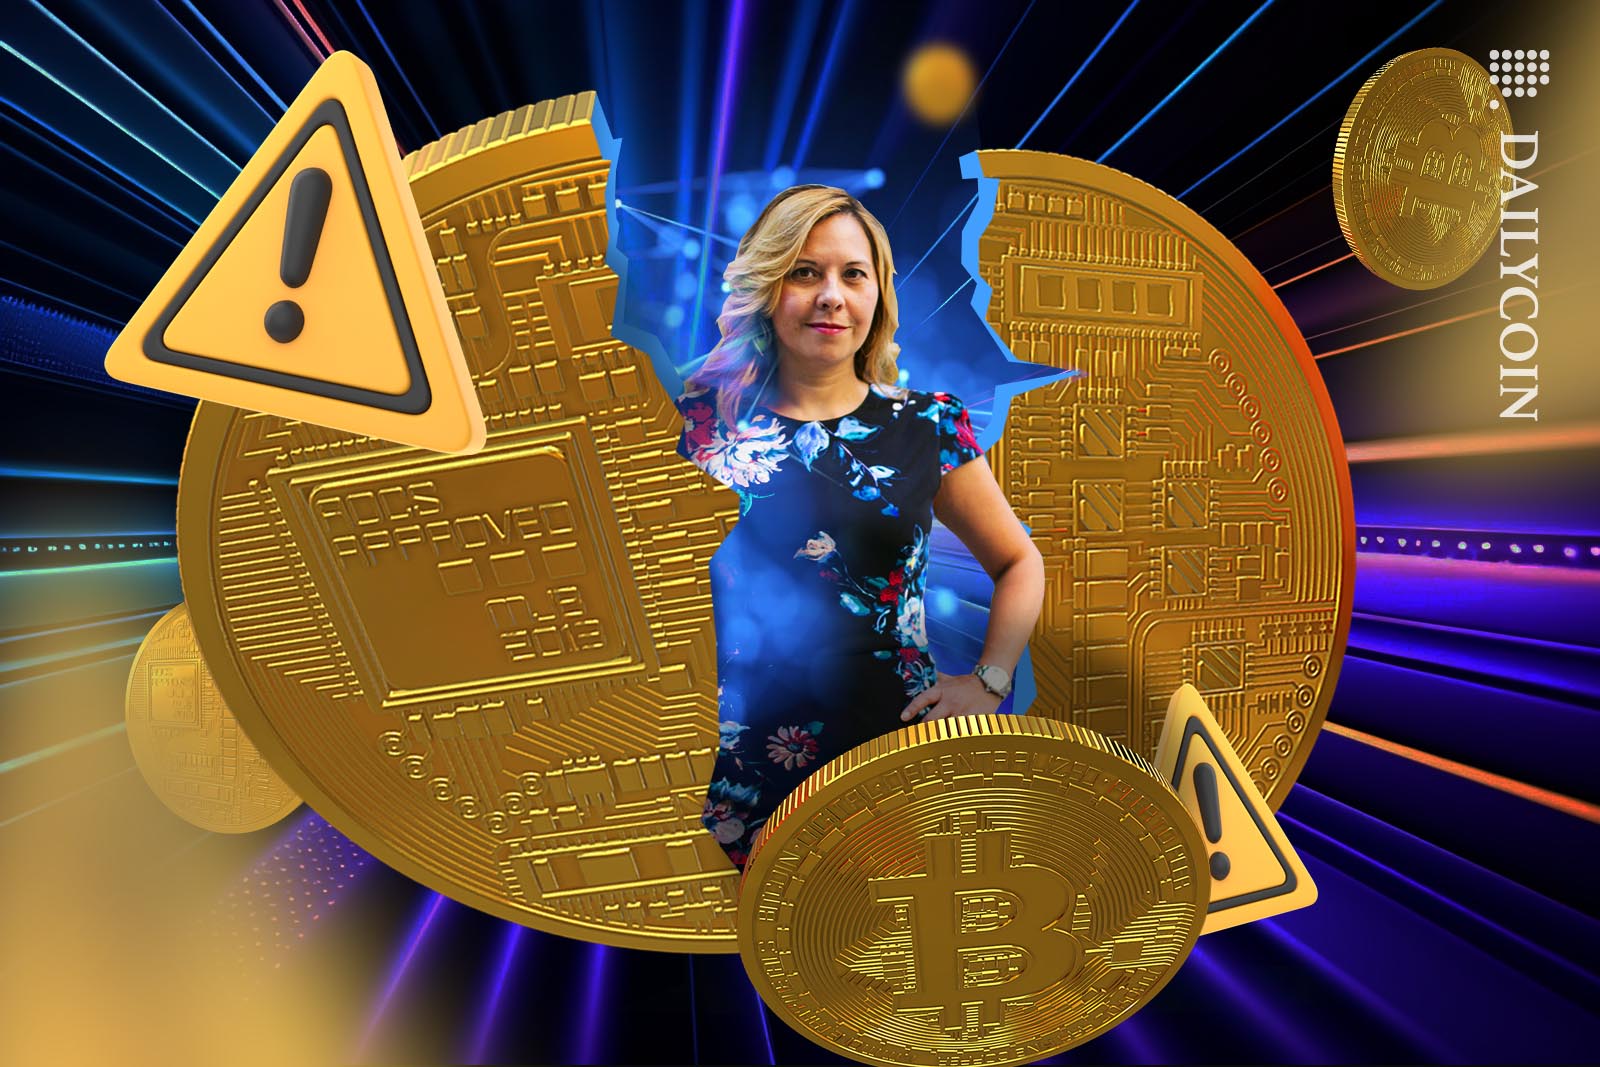 Christy Goldsmith Romero in the middle of a digital explosion of crypto coins, bitcoins and warning signs.